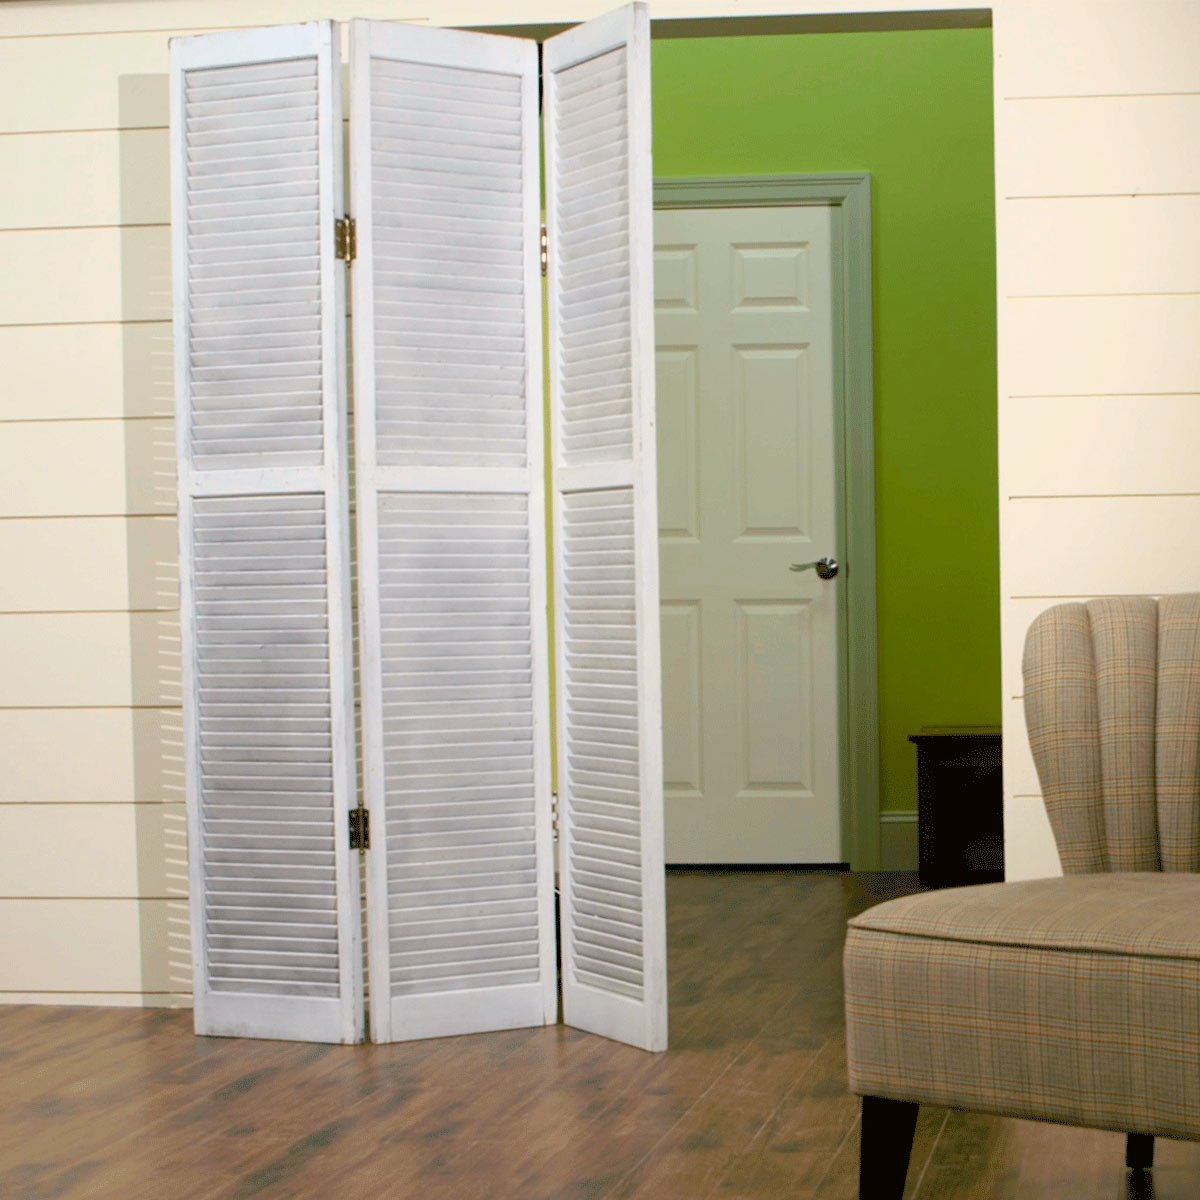 Privacy Screen With Salvaged Closet Doors The Family Handyman within dimensions 1200 X 1200